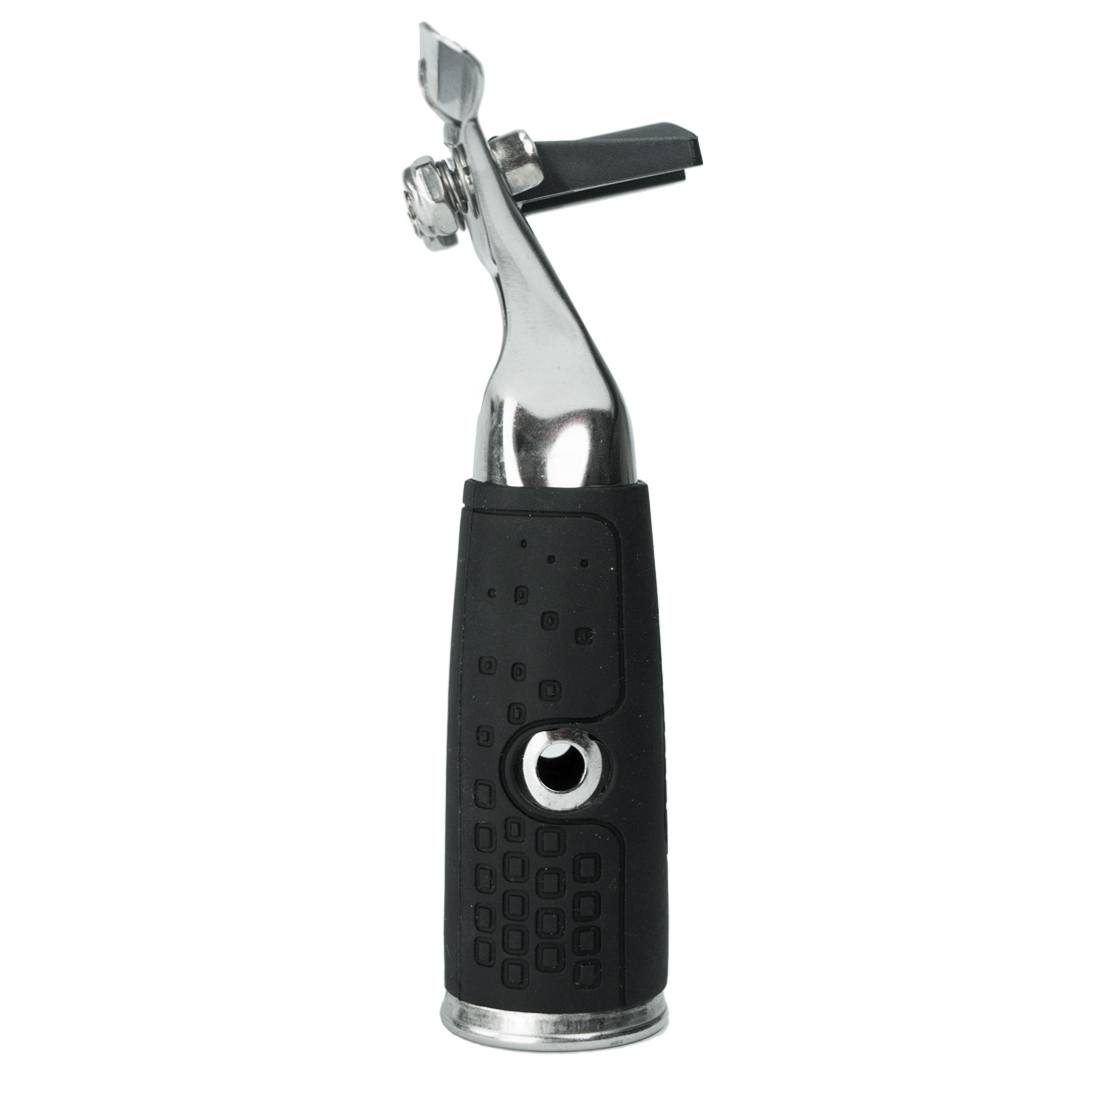 Ettore Quick Release Stainless Steel with Rubber Grip Squeegee Handle Clip Released Upright Left Side View